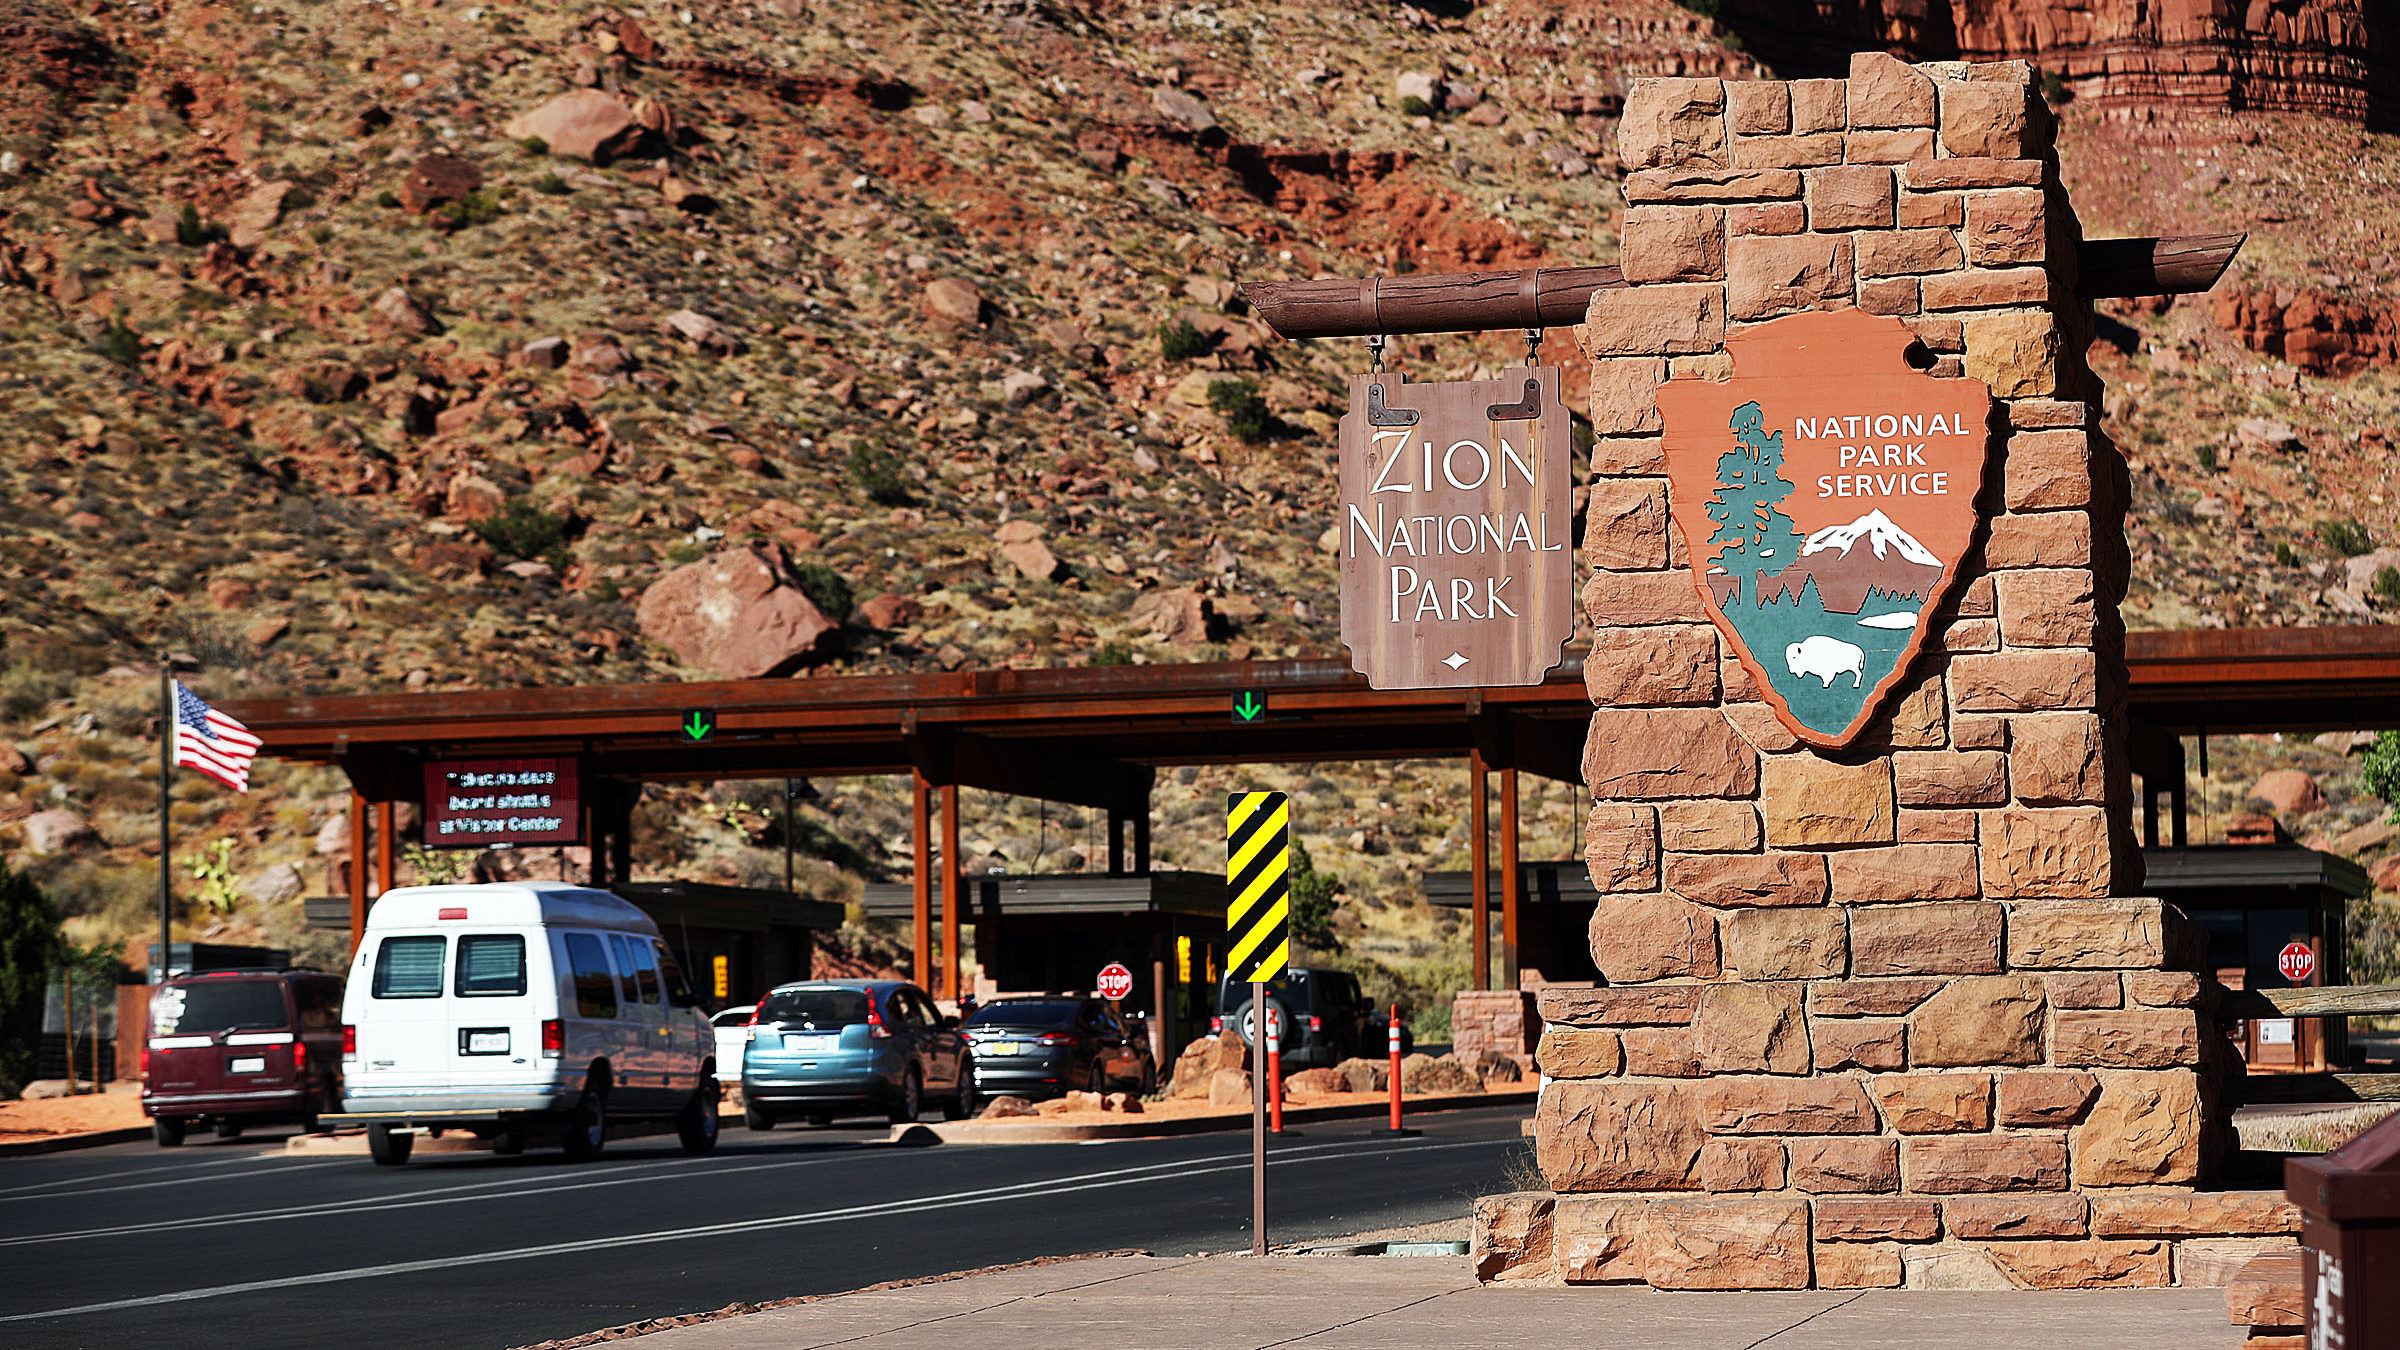 Zion National Park officials say one woman died this week, while a man suffered from hypothermia. T...